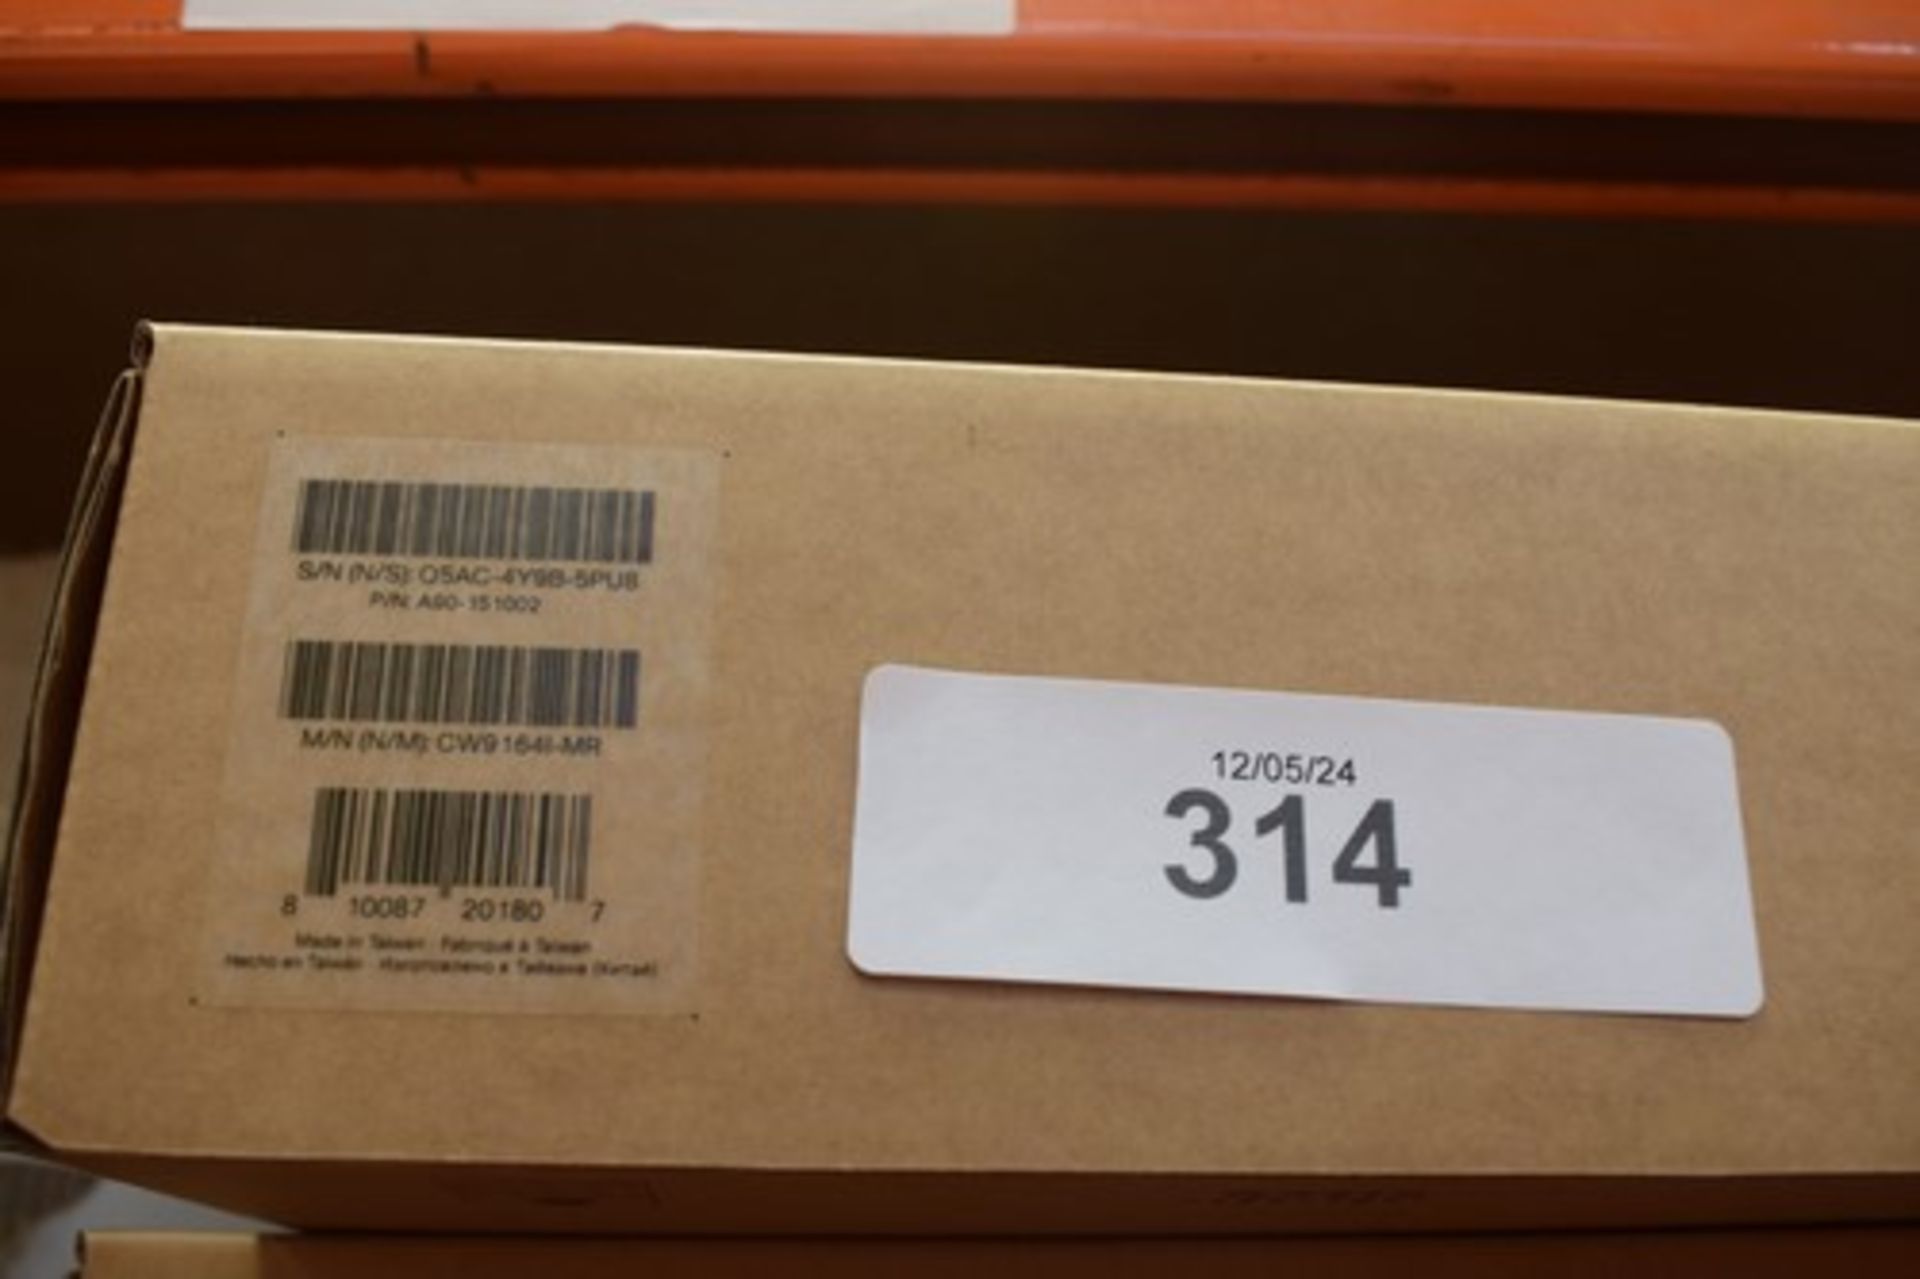 1 x Cisco unit, product No: A90-151002 - sealed new in box (C18)